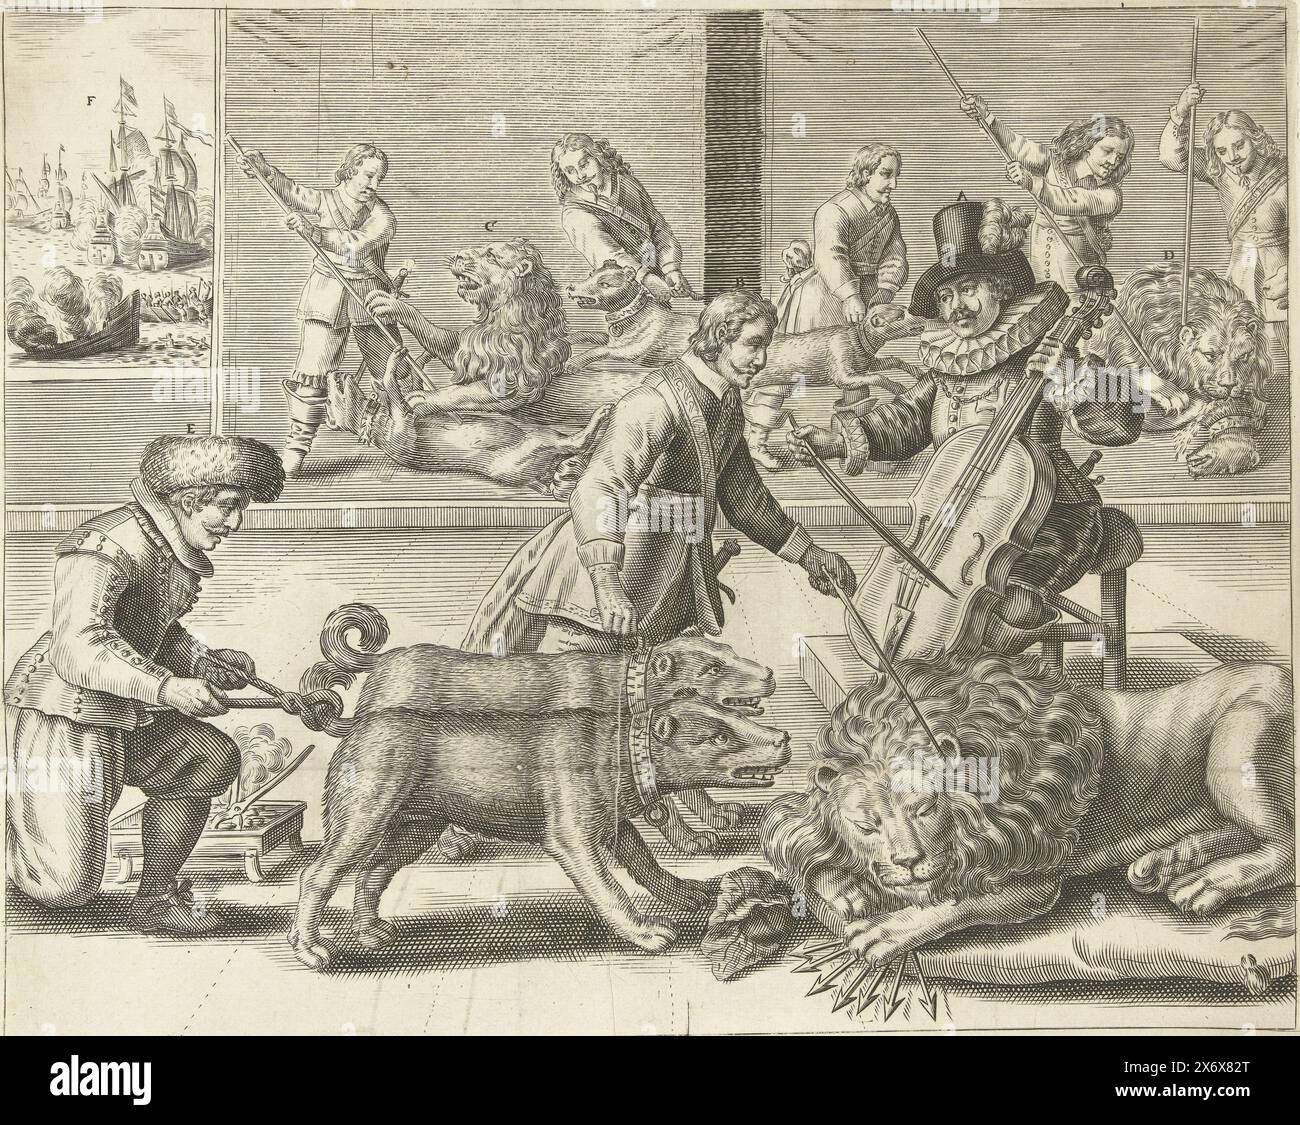 Cartoon on England, 1652, Leeuw en Honden Geveght (title on object), Cartoon on England during the First English War, 1652. The Dutch Lion is lulled to sleep by the music of the Spaniard's cello but is tickled awake in his ear by Cromwell. Two English dogs (doggen) bark at the lion, but their tails are pinched off by the Dutch sailor with red-hot tongs. In the background a sea battle and fighting between the lion and dogs. A text sheet accompanies the print., print, print maker: Crispijn van de Passe (II), Northern Netherlands, 1652, paper, engraving, height, 230 mm × width, 282 mm Stock Photo